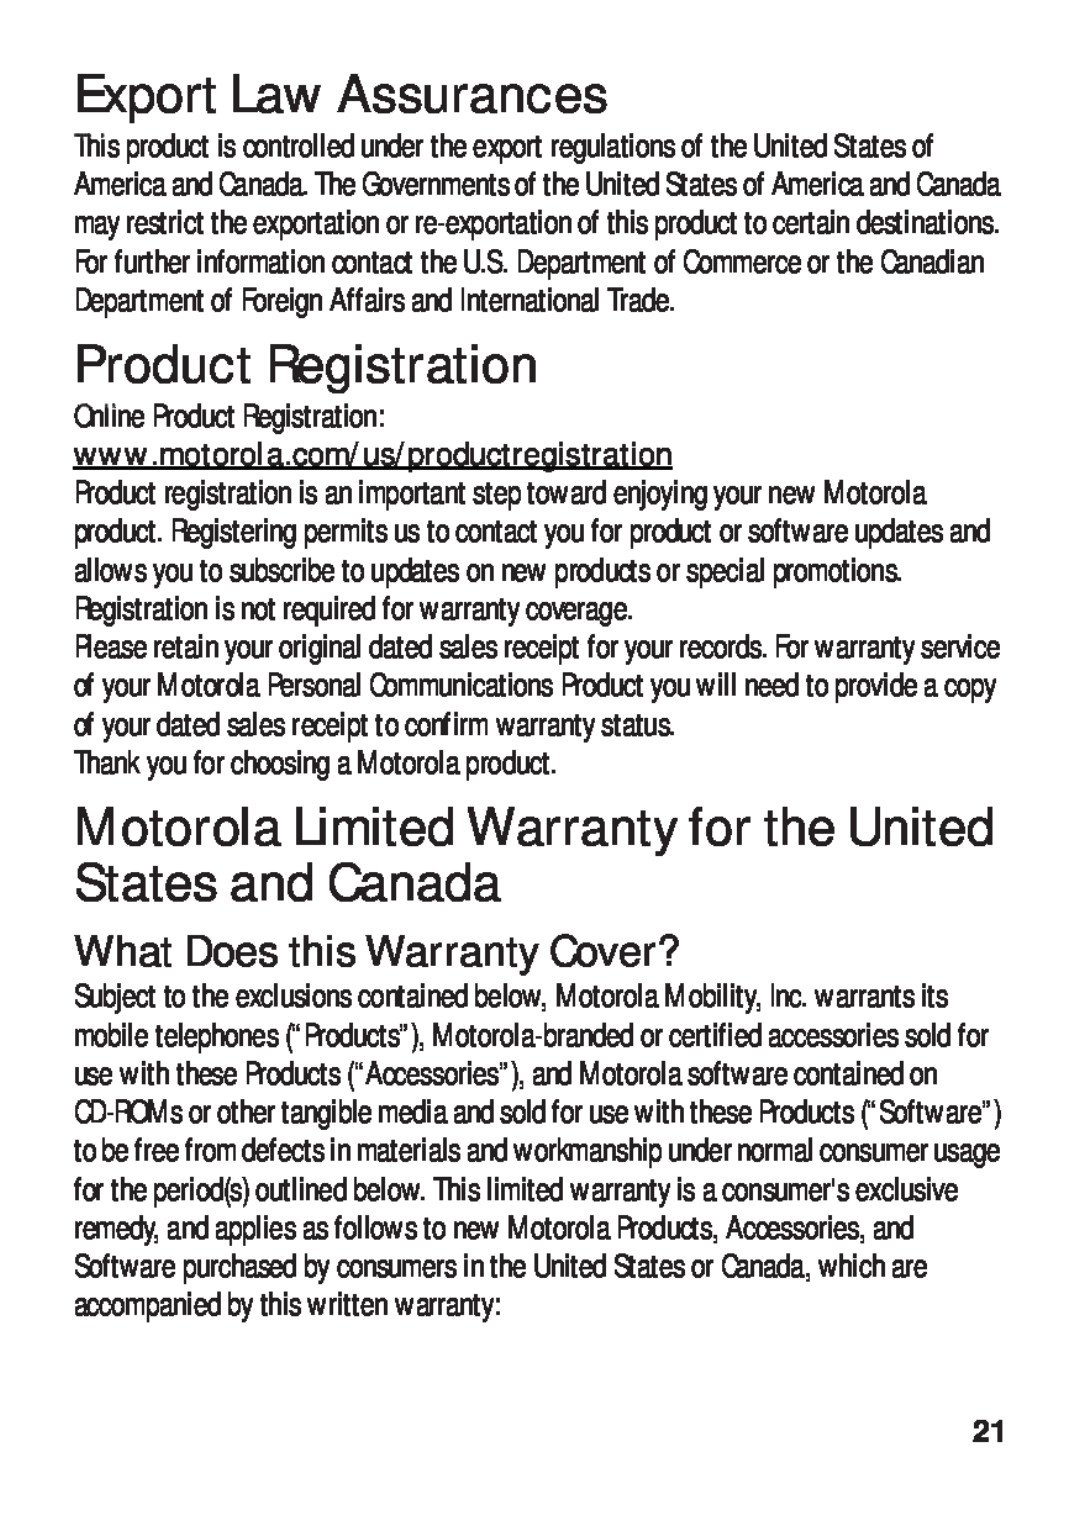 Motorola TX500 manual Export Law Assurances, Product Registration, What Does this Warranty Cover? 